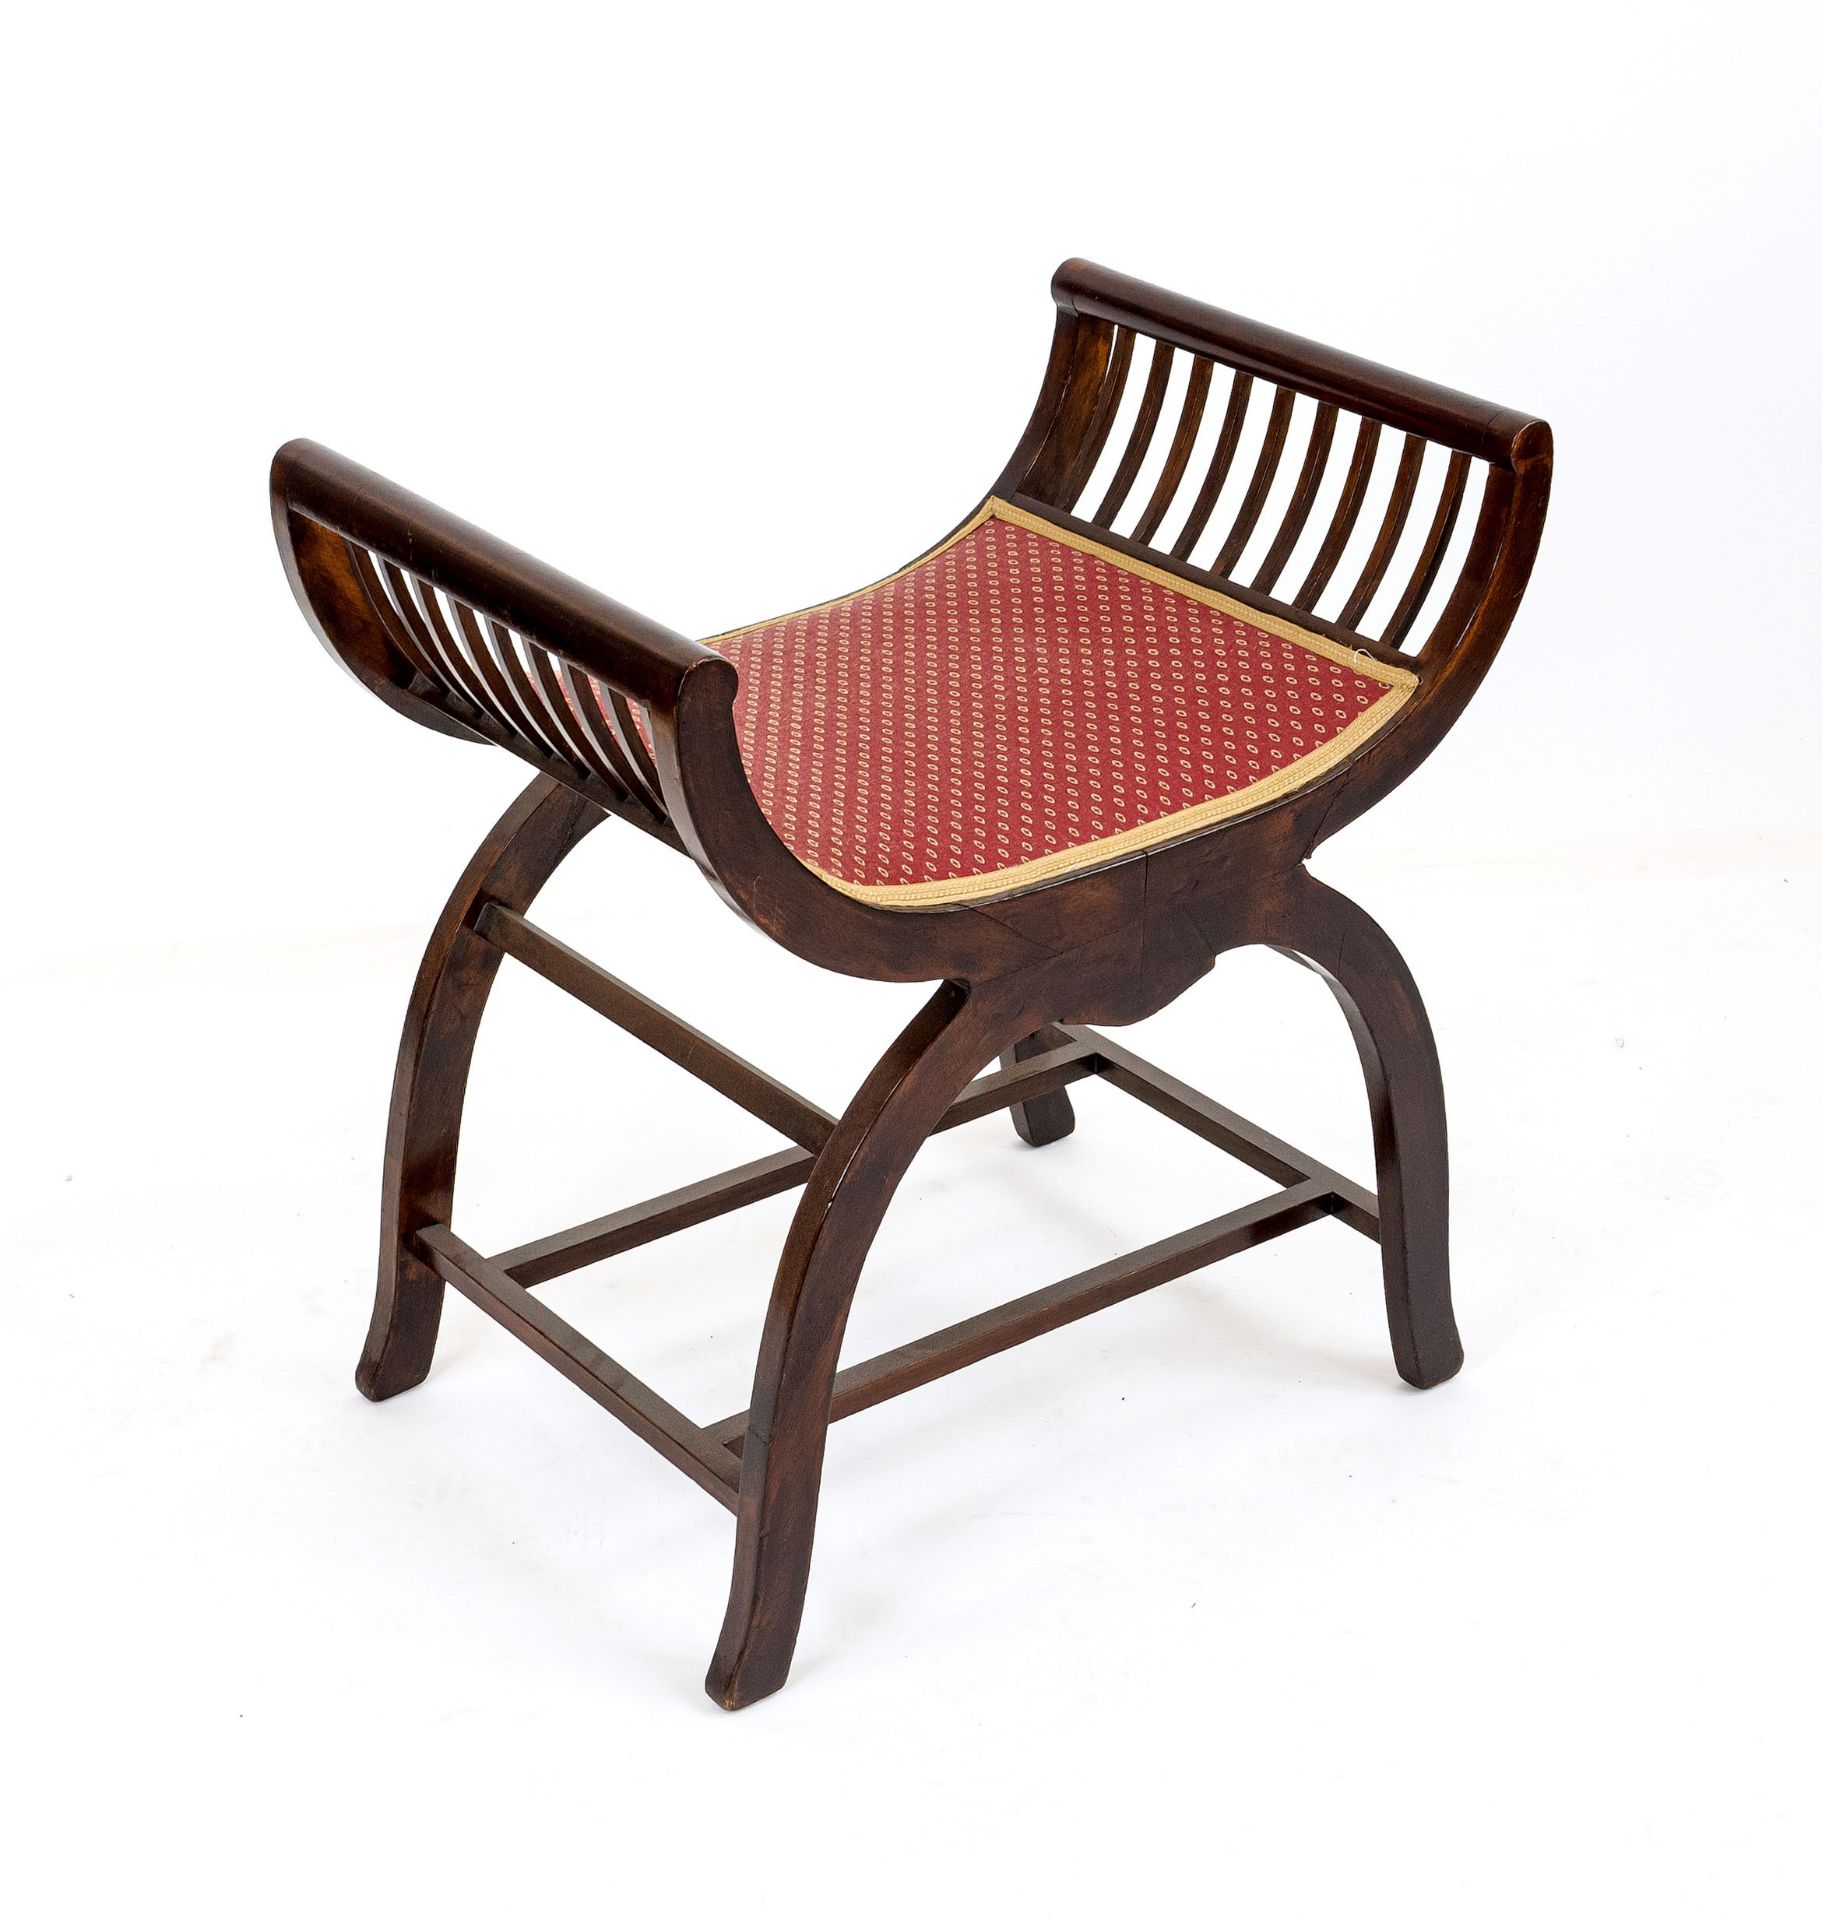 Gondola chair, 19th century, mahogany, restored 59 x 56 x 38 cm - The furniture can only be viewed